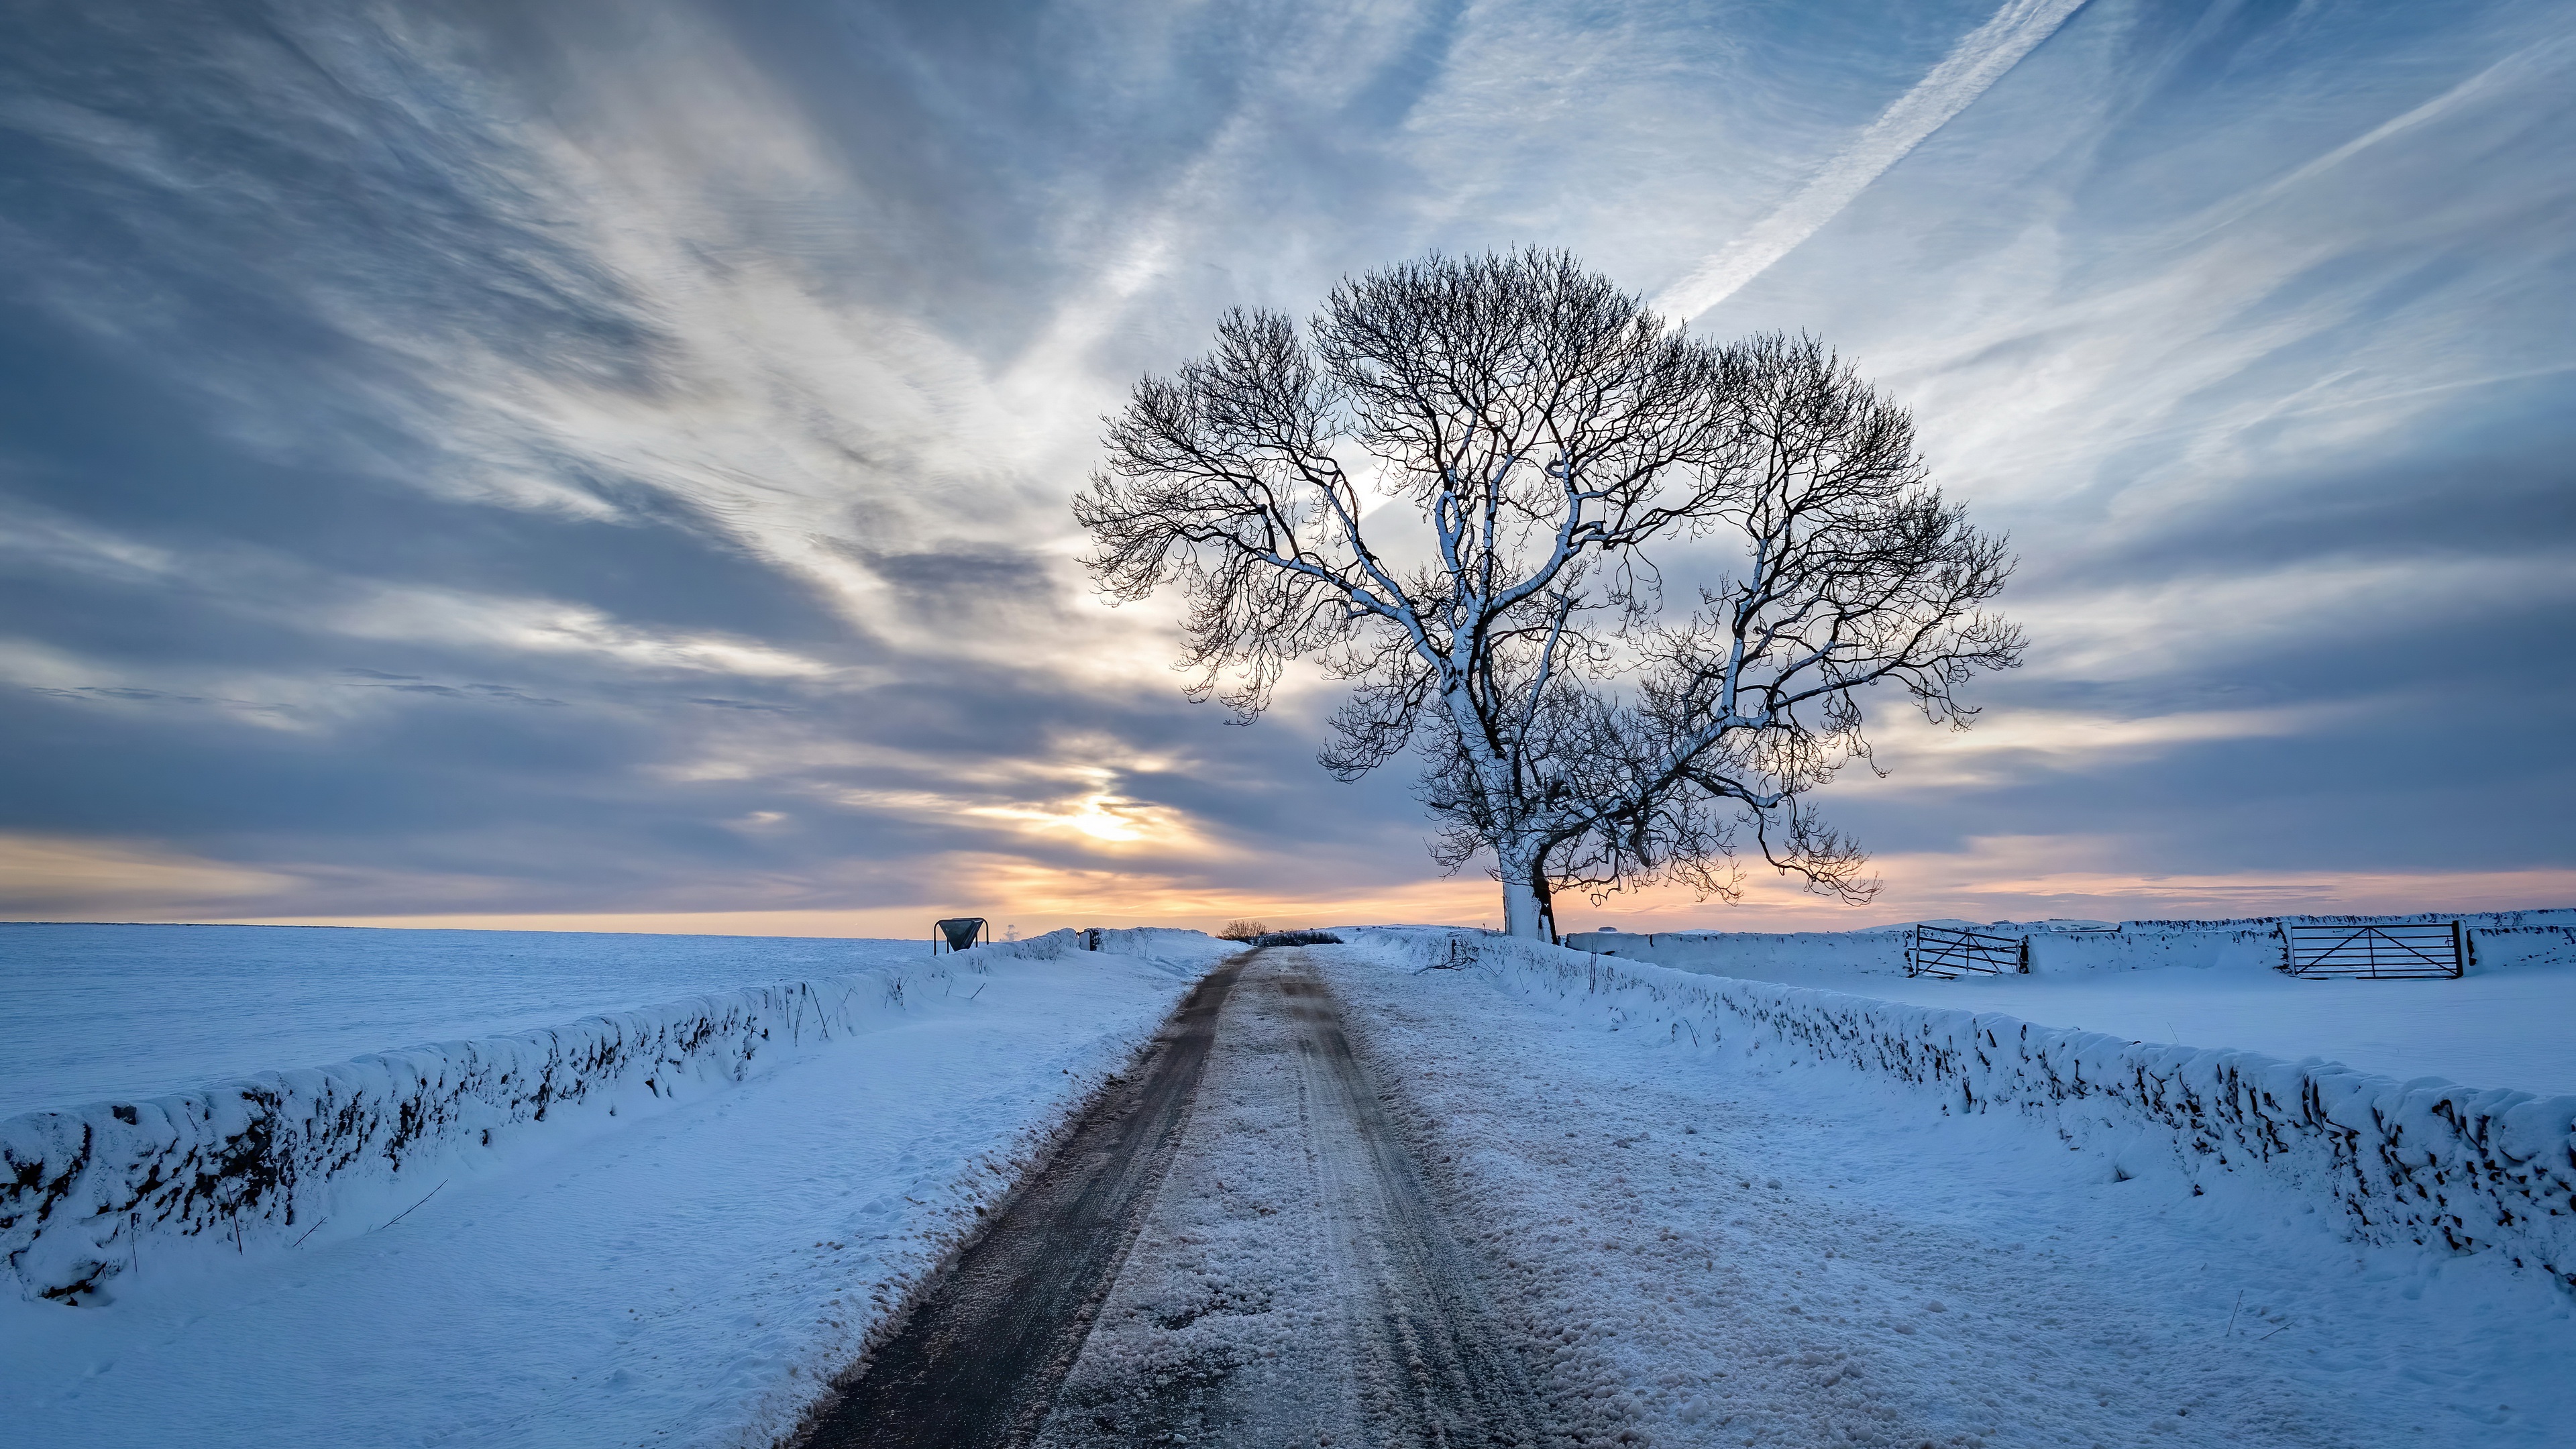 General 3840x2160 nature landscape sky winter cold ice snow road outdoors